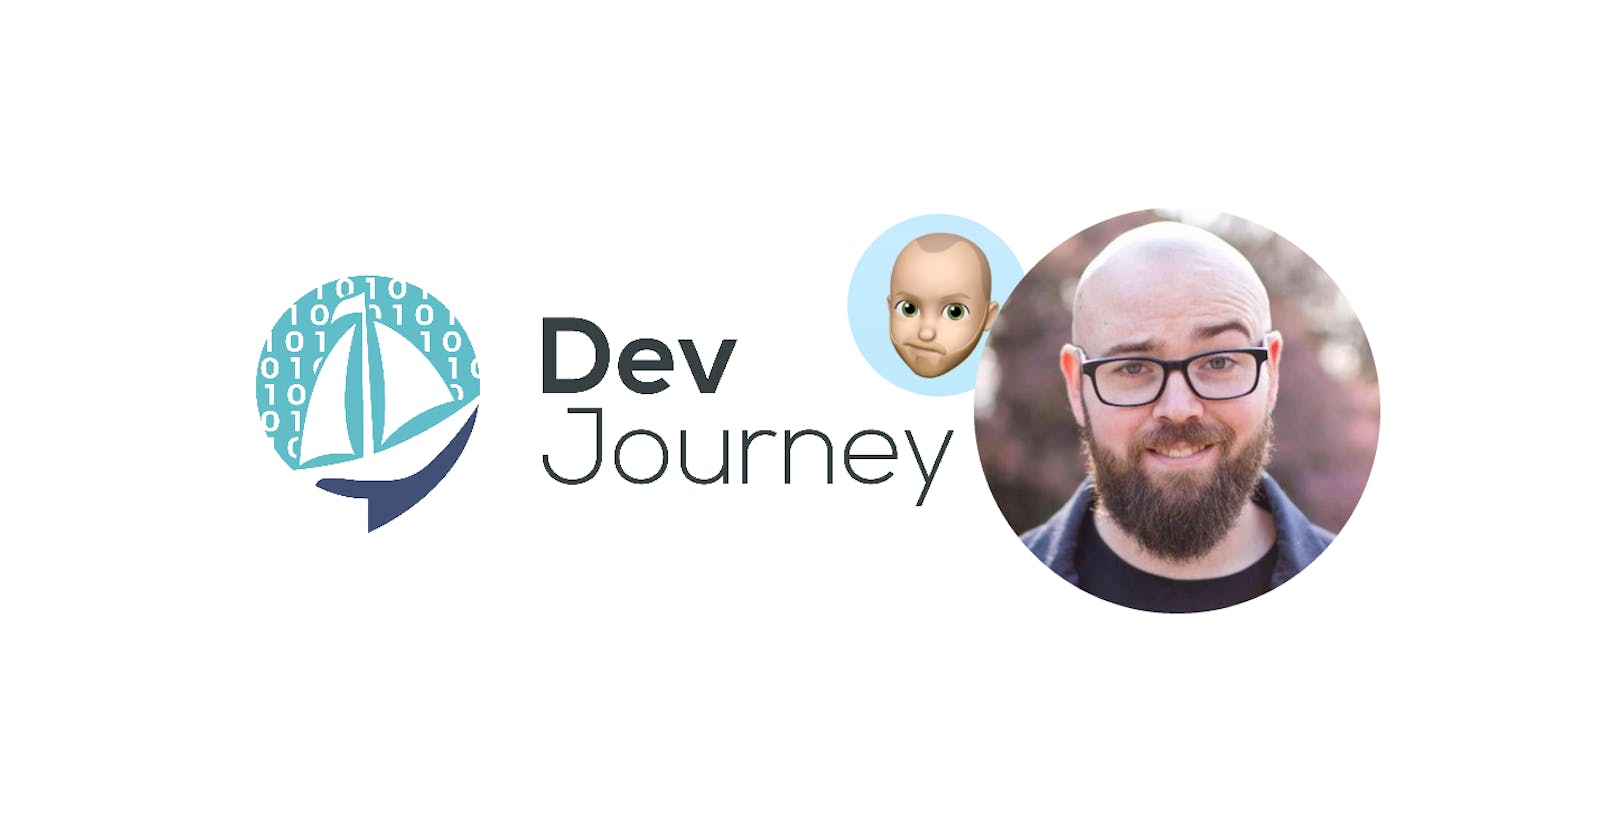 Jason Lengstorf successfully bet on himself for his career... and other things I learned recording his DevJourney